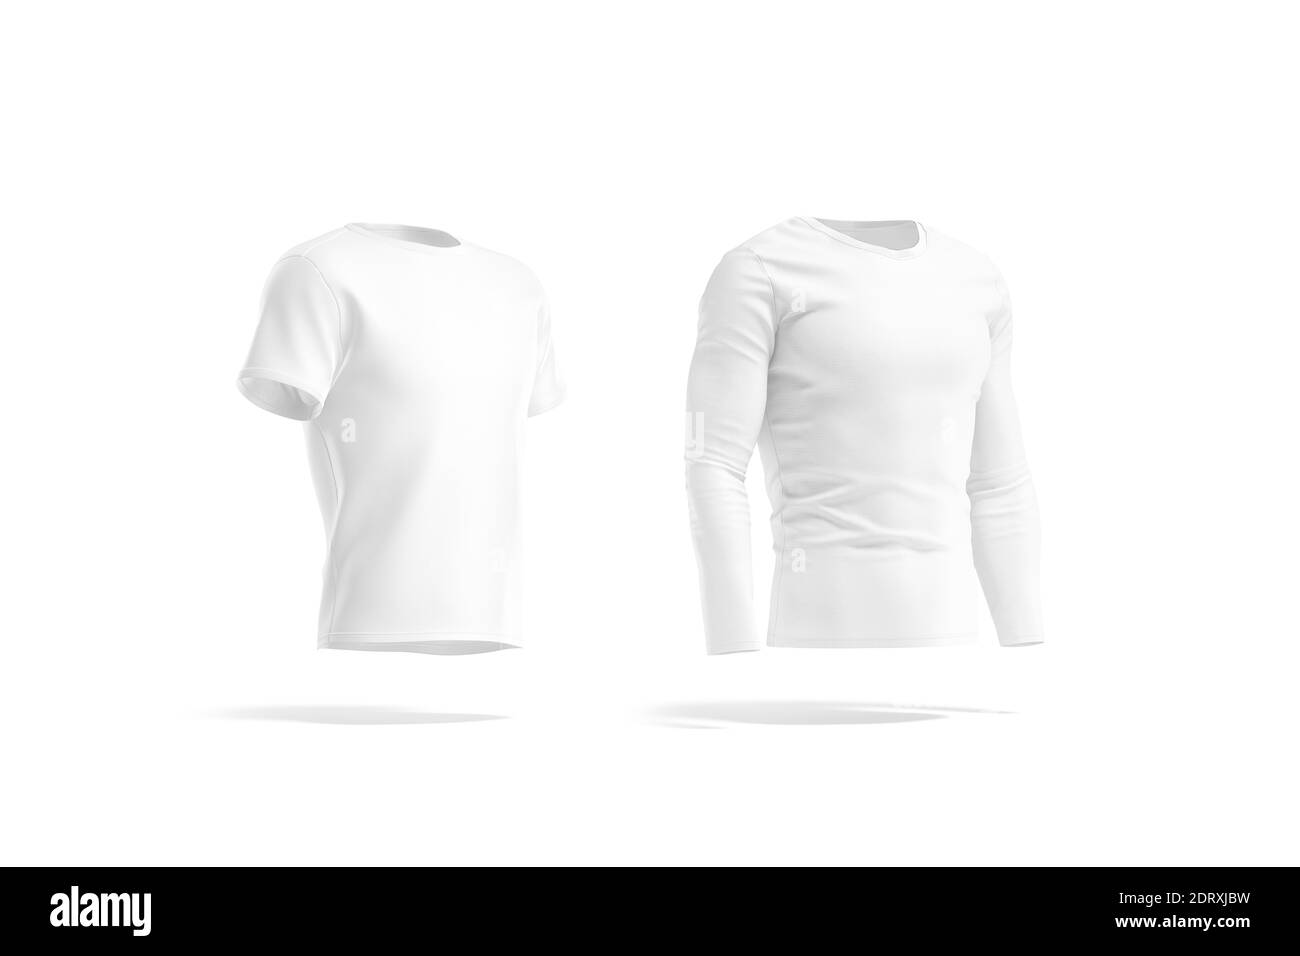 Blank white t-shirt and longsleeve mock up, side view, 3d rendering. Empty sport neckline tee-shirt mockup, isolated. Clear men fit cotton garment for Stock Photo